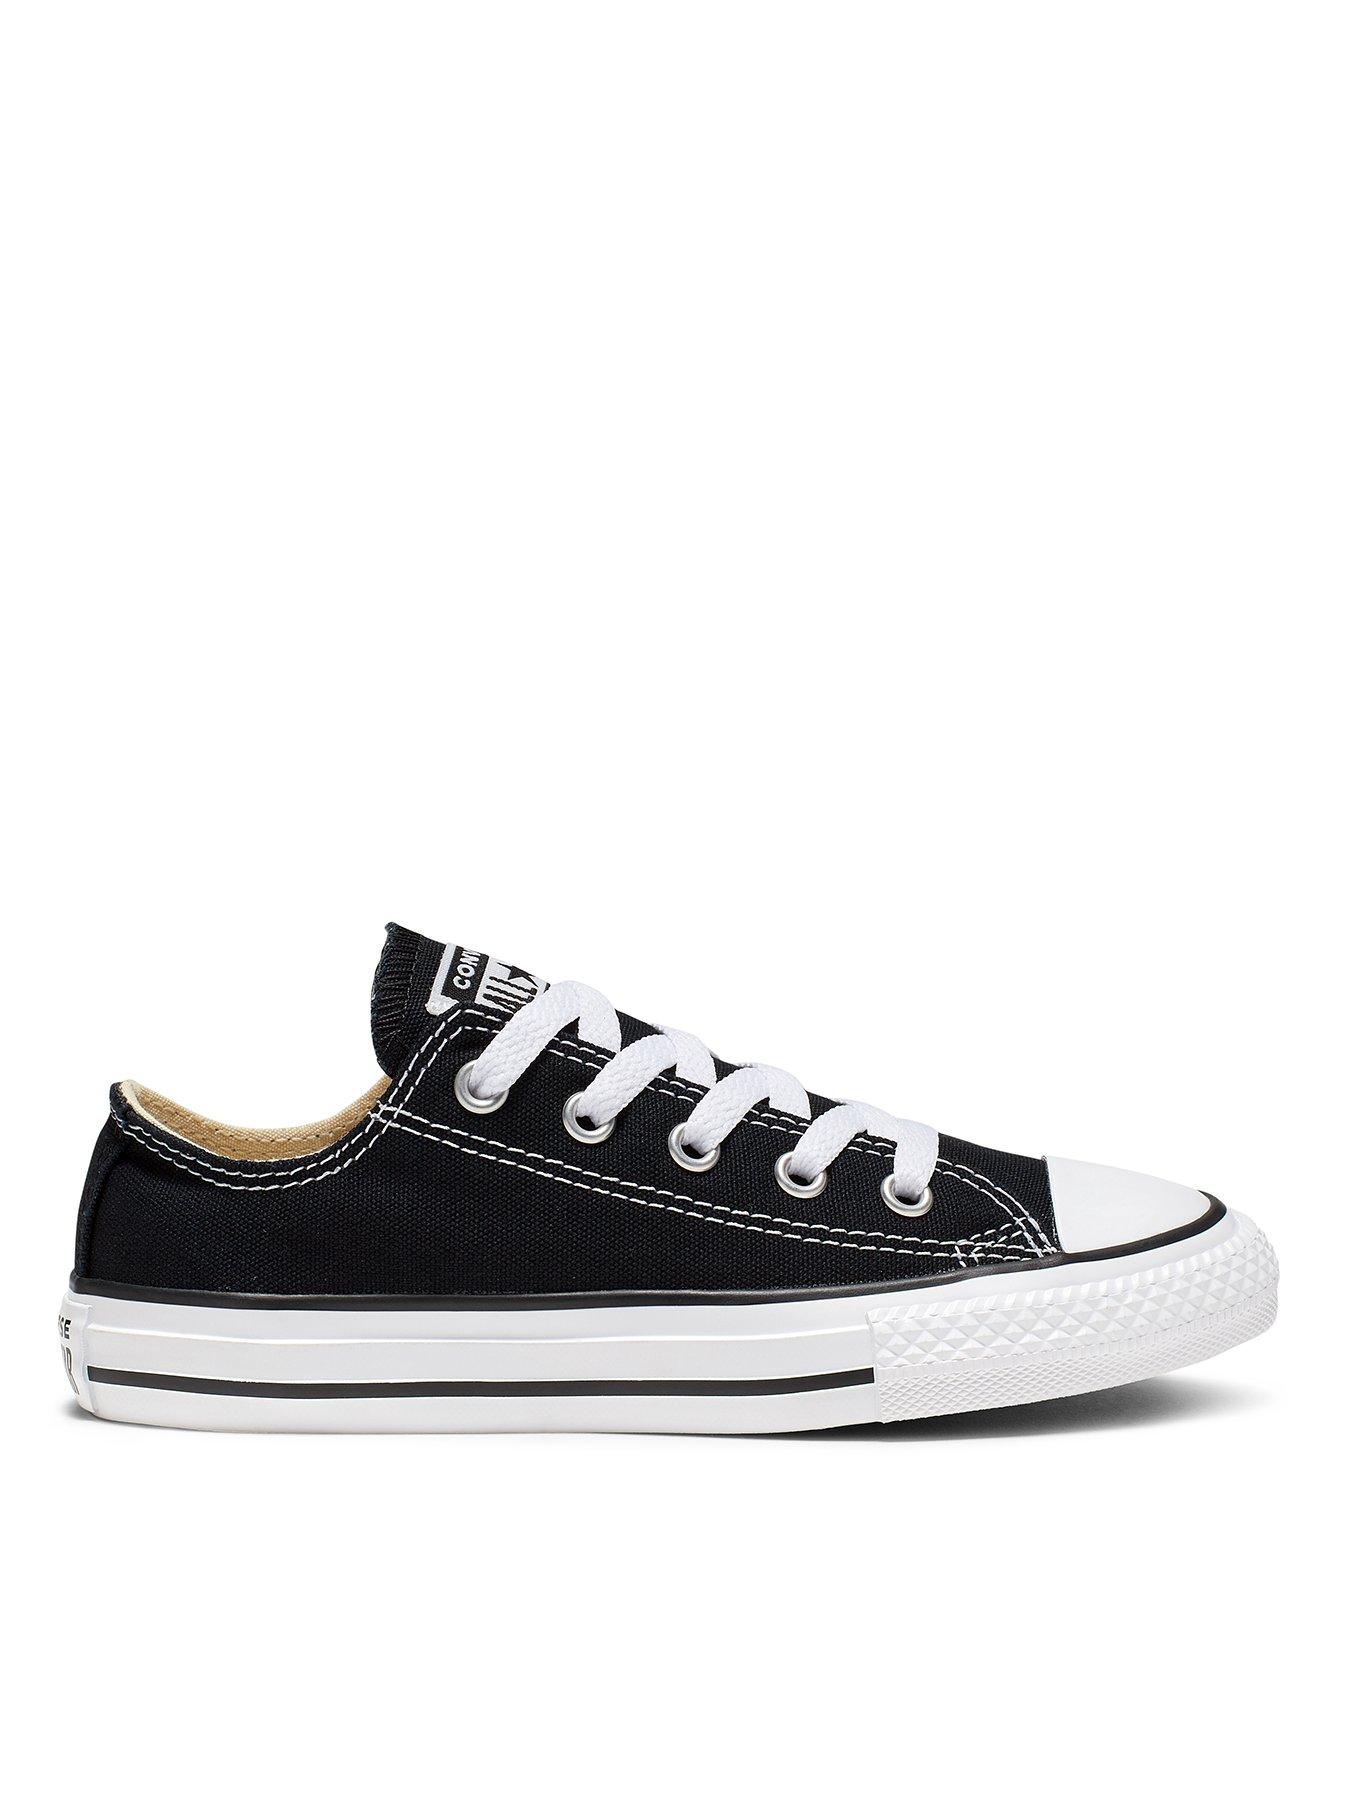 Converse Taylor All Star Ox Unisex Trainers -Black very.co.uk